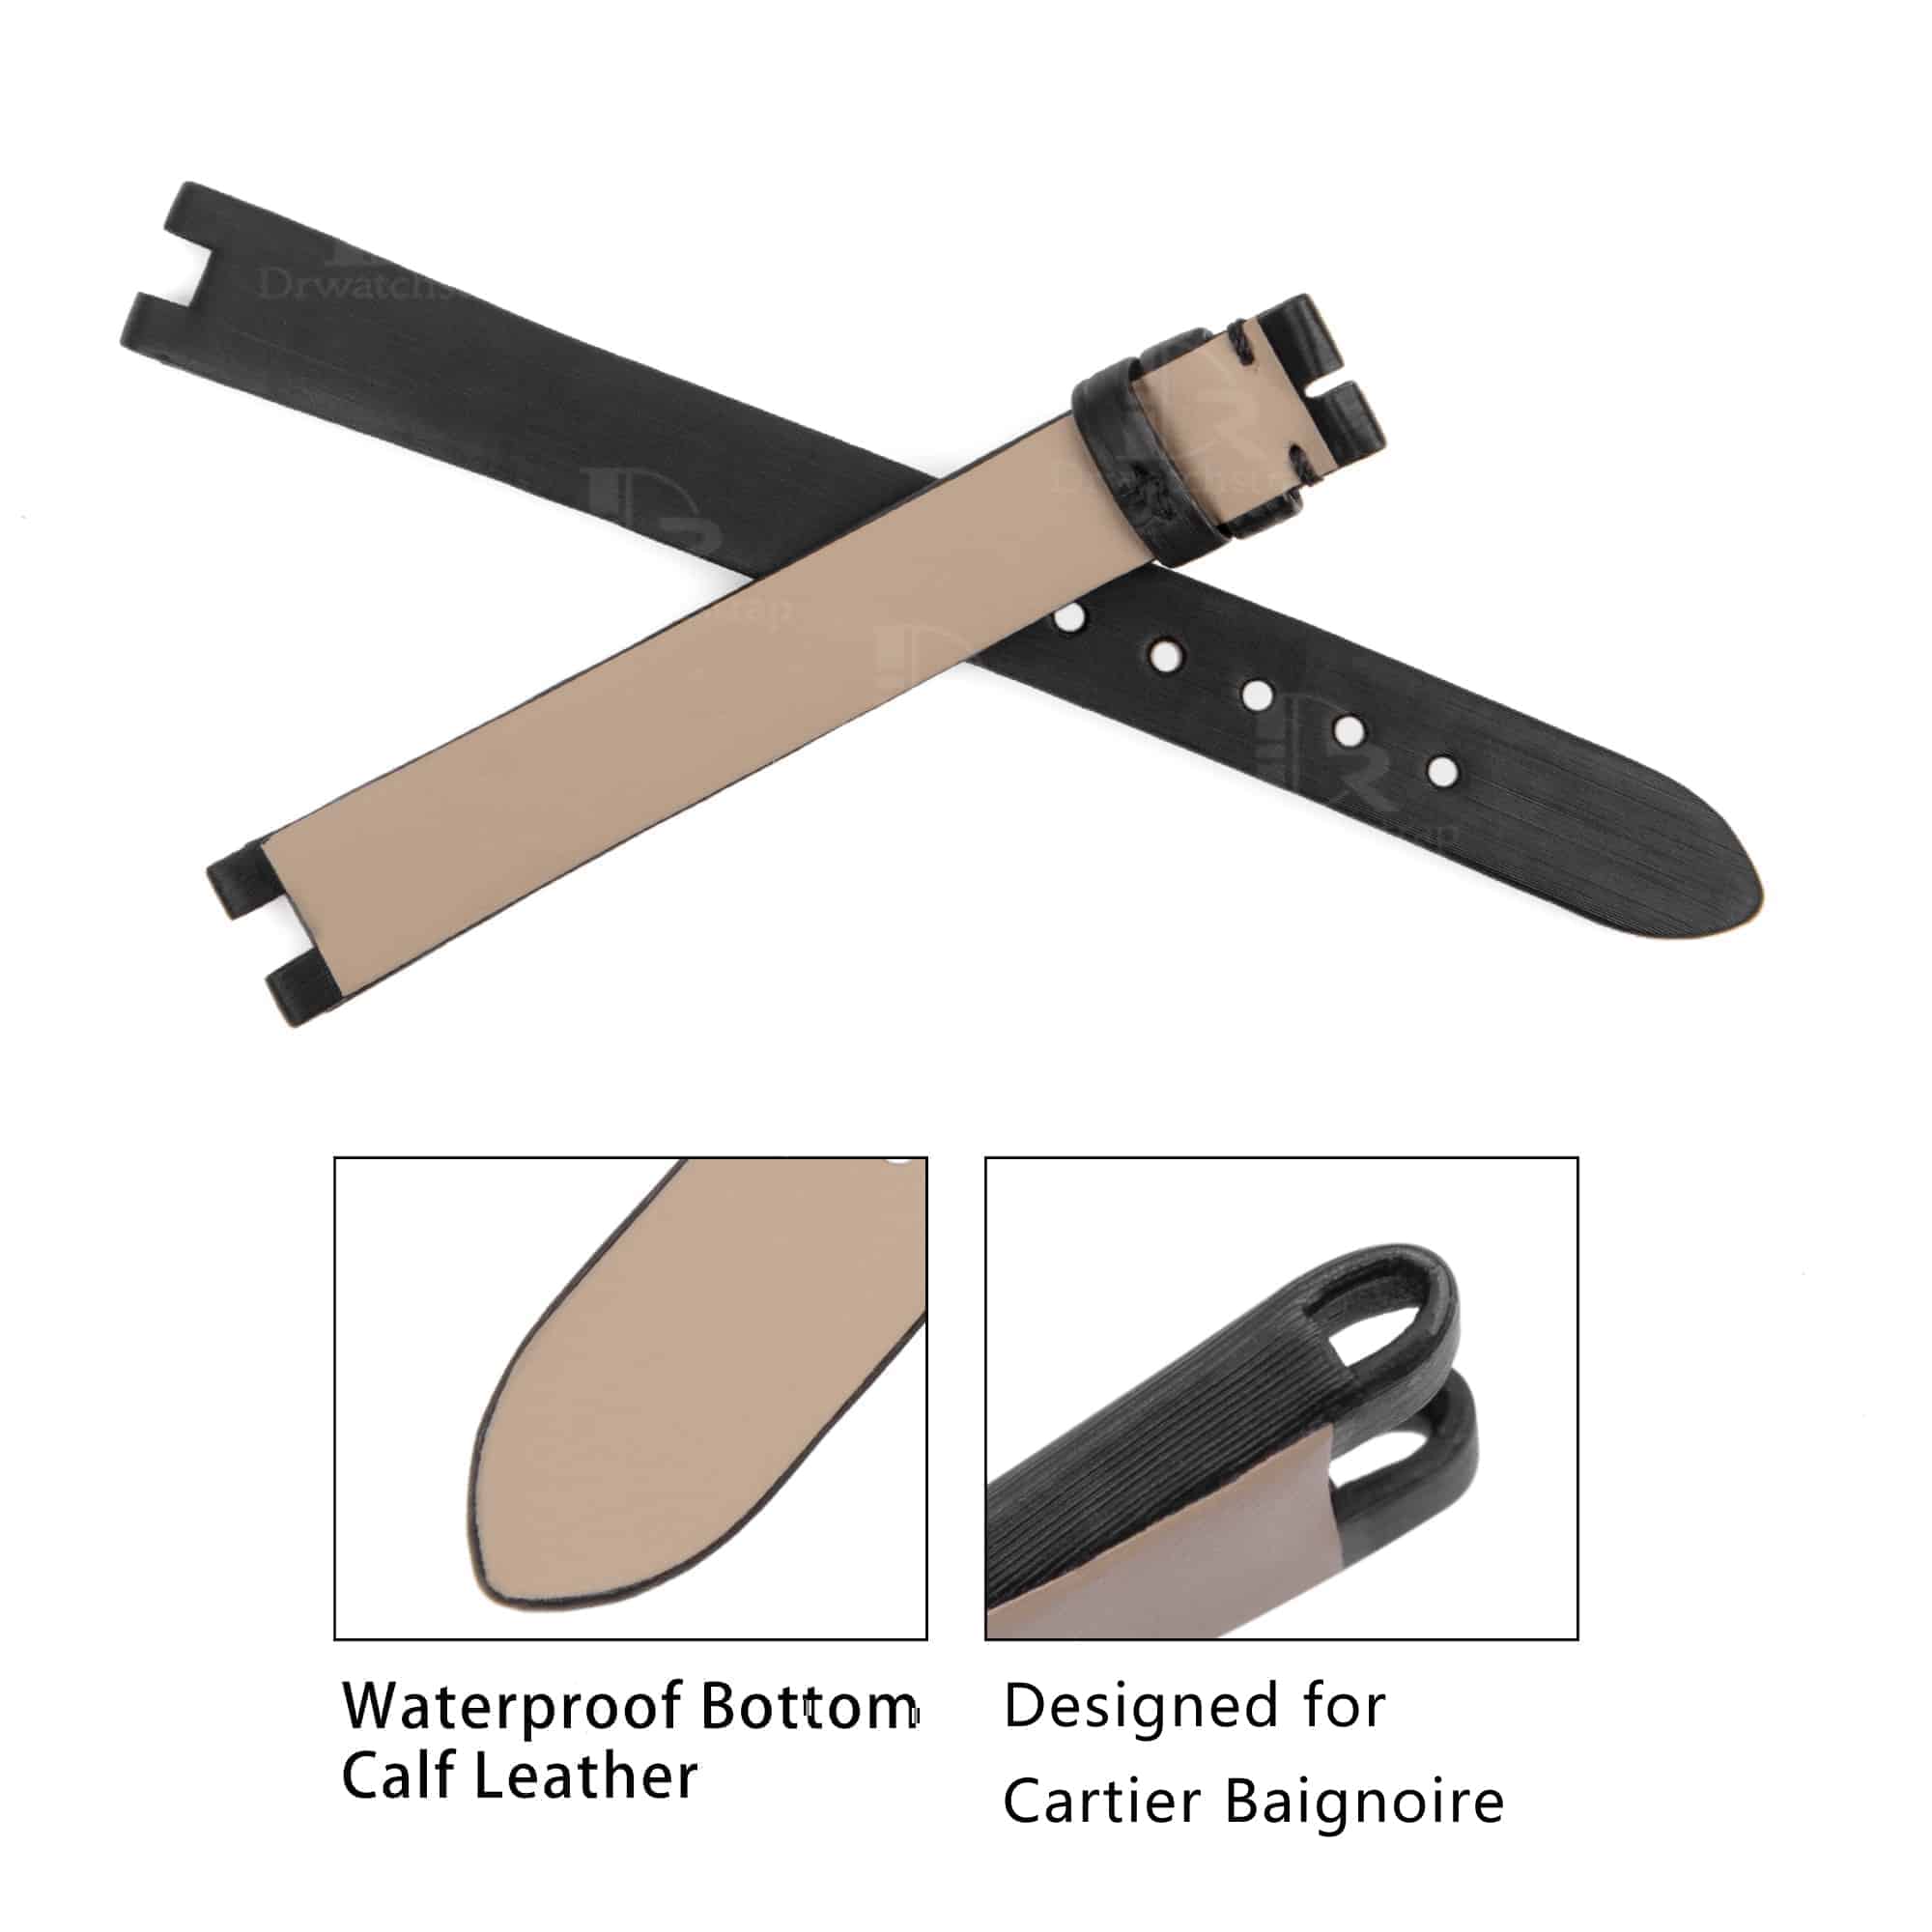 Best quality black Satin Cartier Baignoire watch strap replacement watch band for for Cartier Baignoire watches oniline at a low price - Handmade OEM Cartier straps for sale watch bands